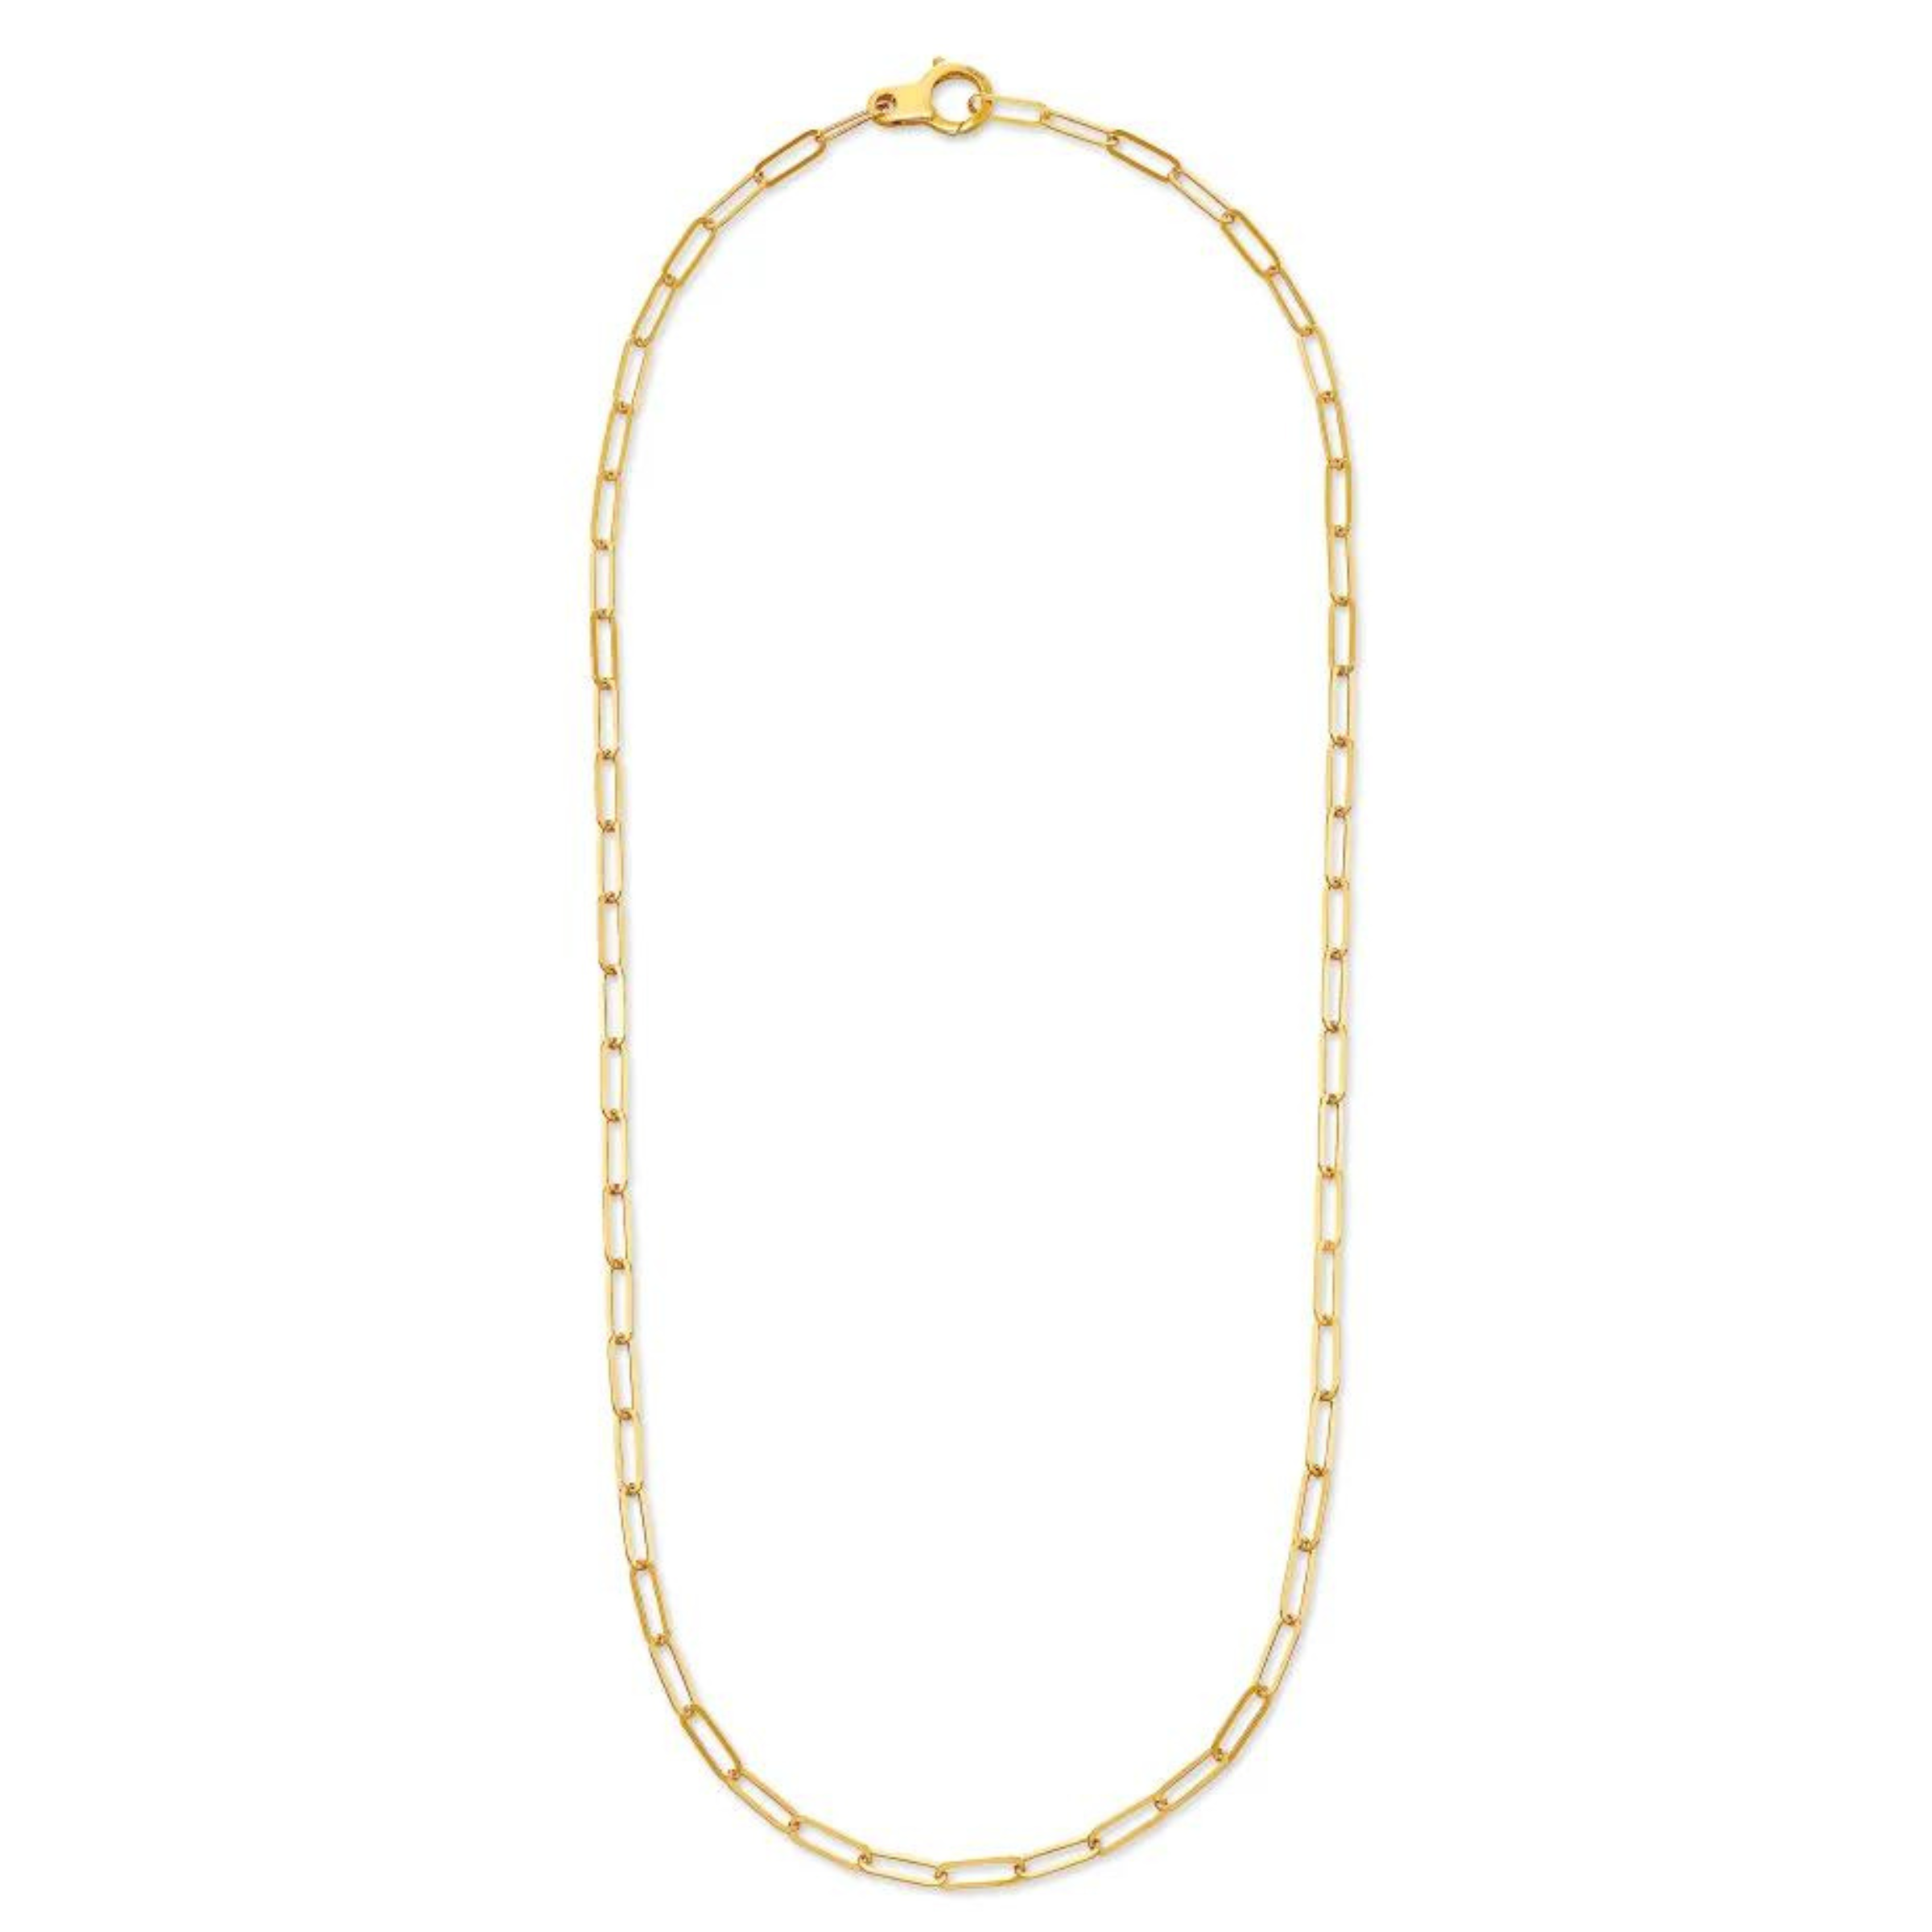 Kendra Scott | Large Paperclip Chain Necklace in 18k Gold Vermeil - Giddy Up Glamour Boutique